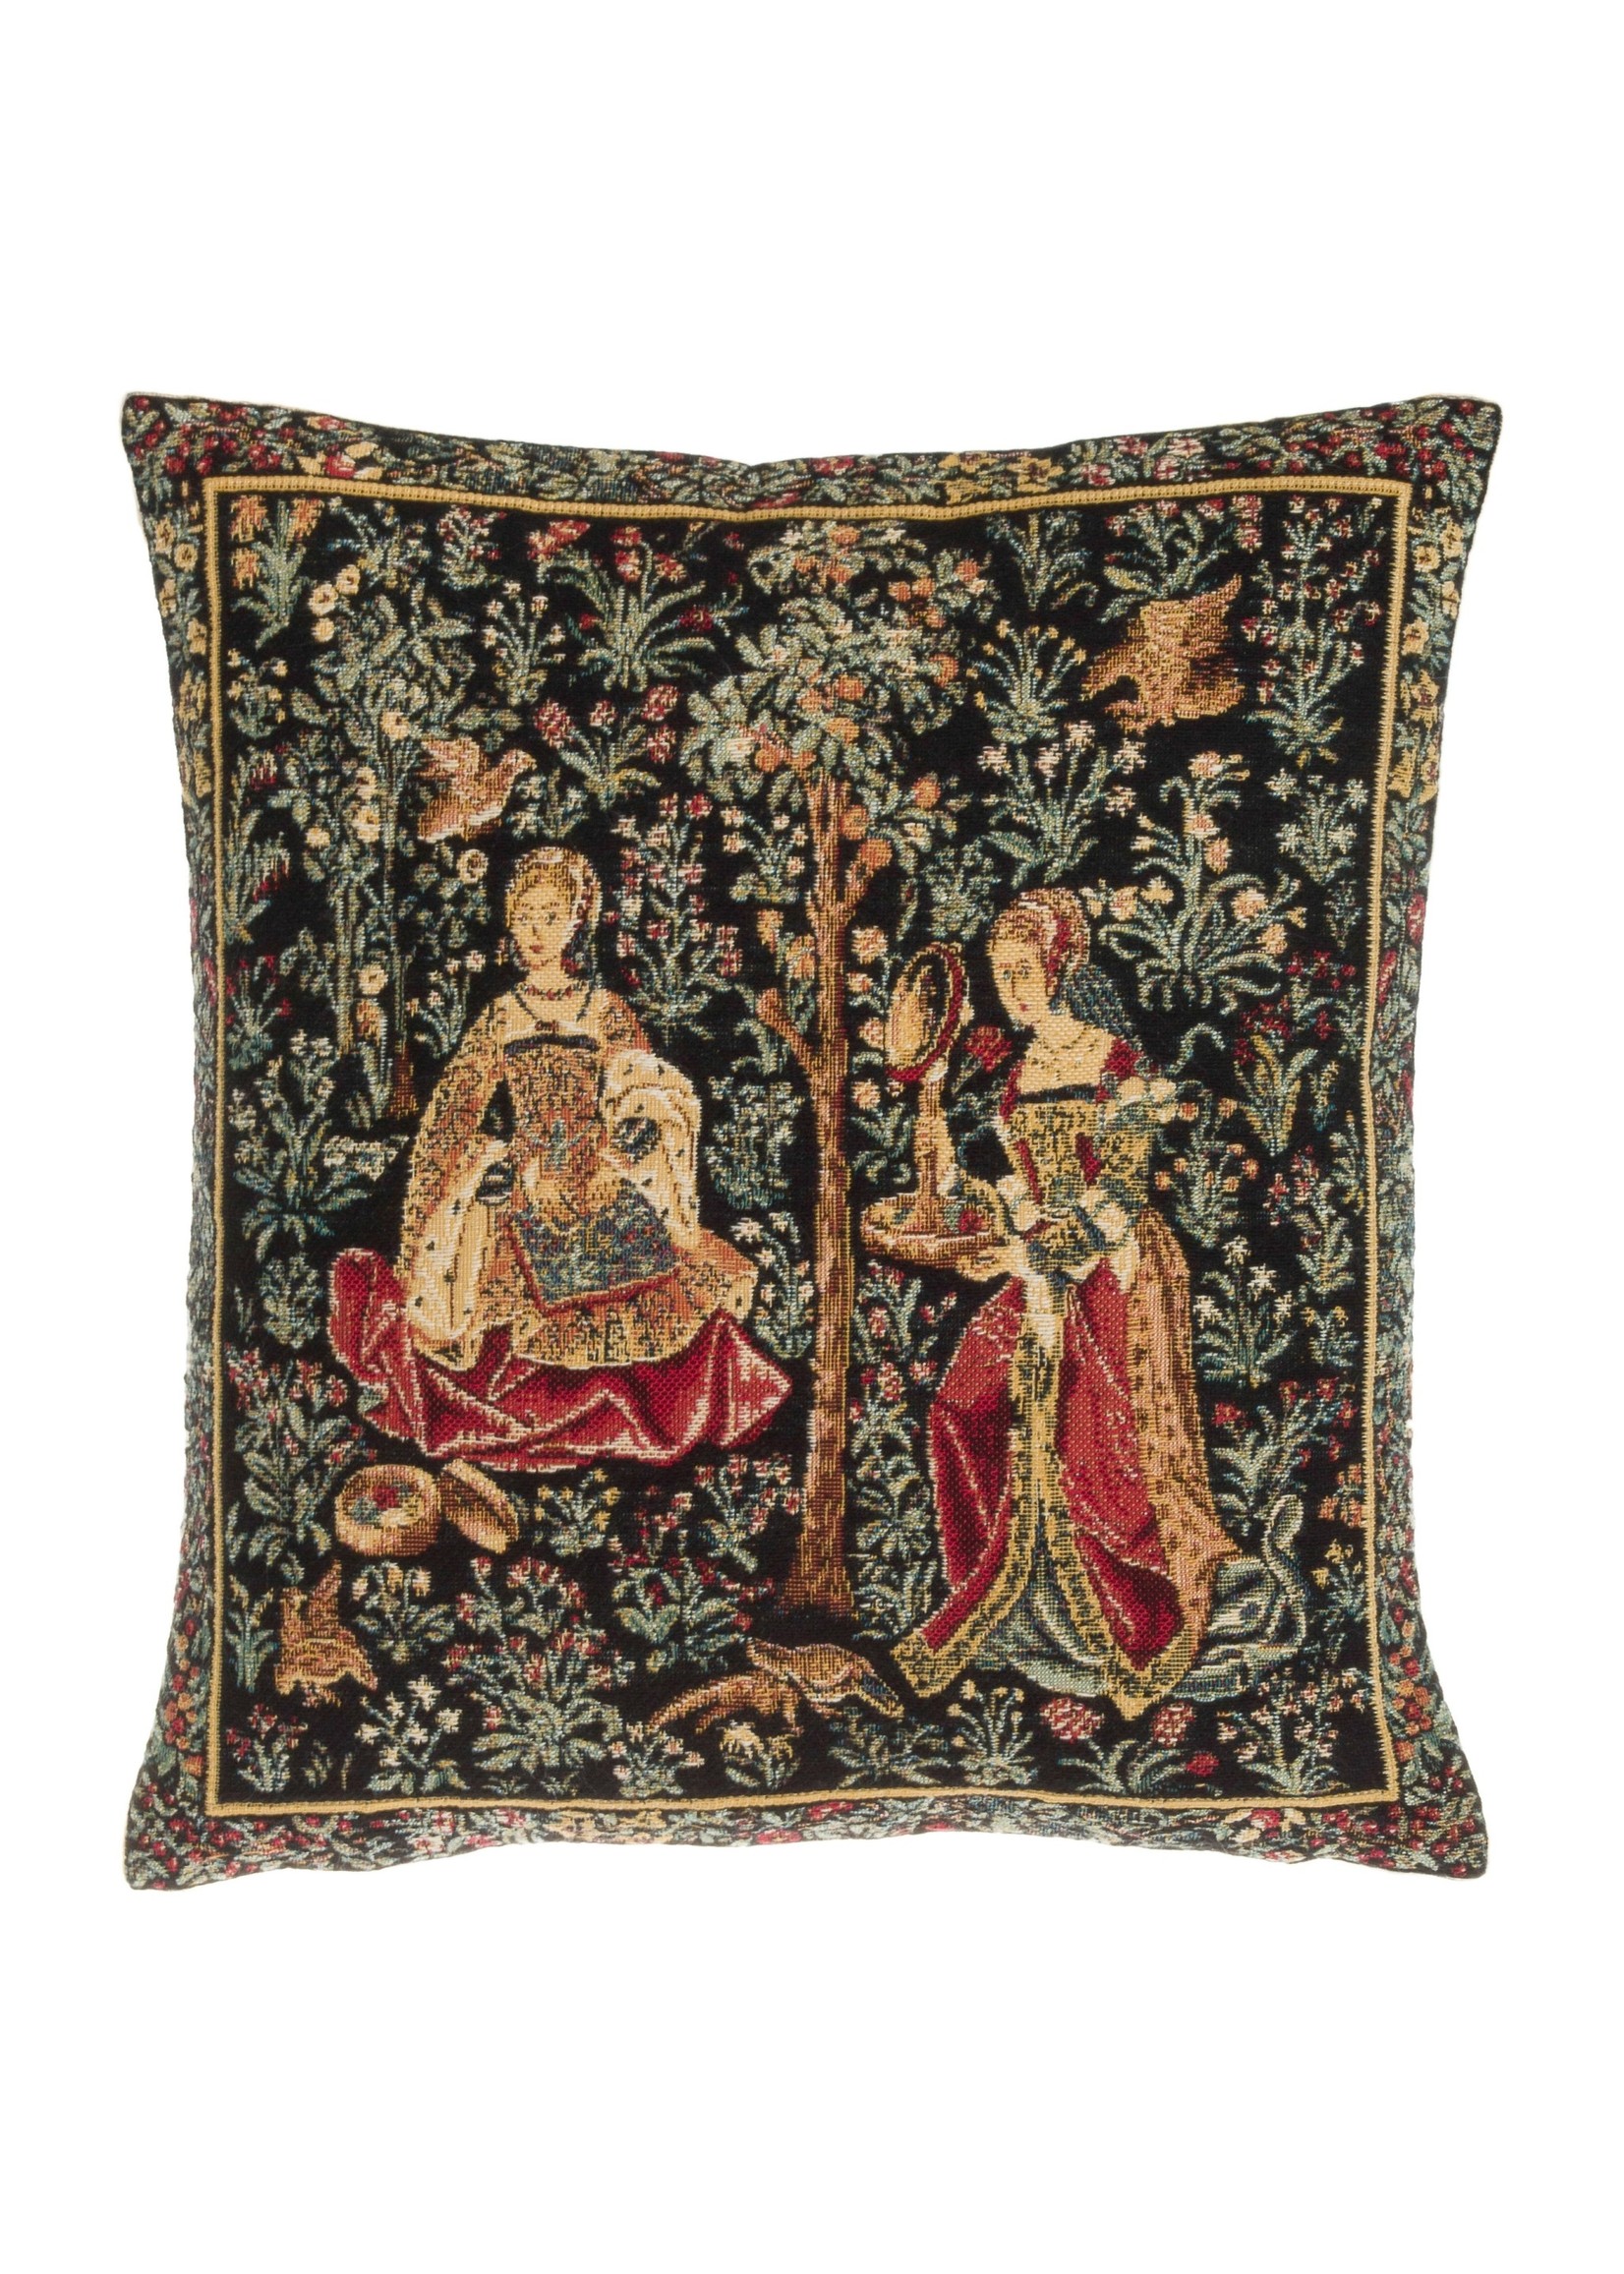 Pillow with Insert - Medieval "The Embroidery"